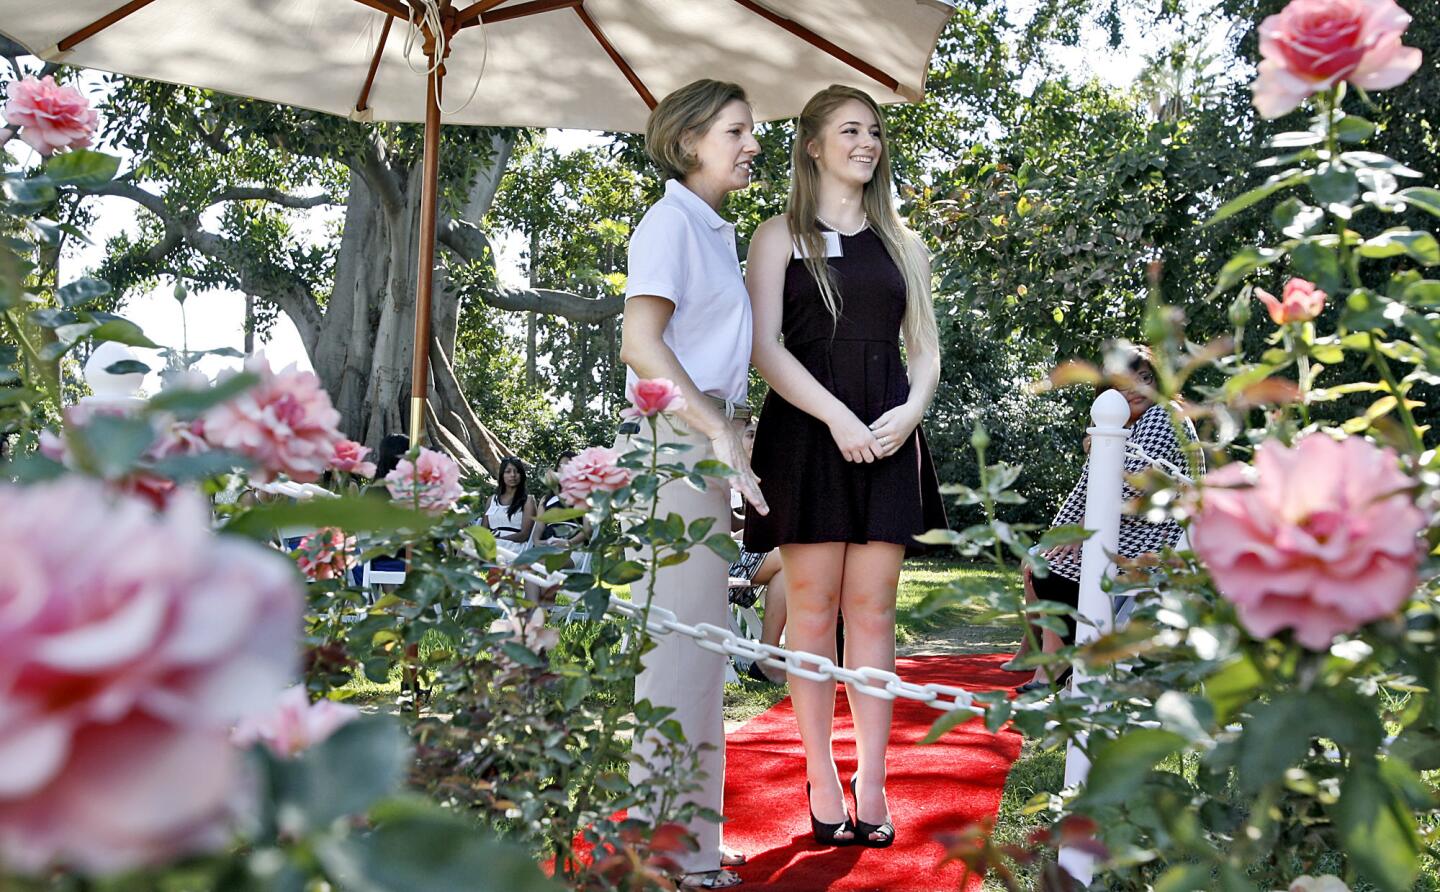 Lindsay, 17 from Glendale, waits to speak to the selection committee for 15 seconds during the Rose Queen & Royal Court Tryouts at the Tournament House in Pasadena on Saturday, Sept. 15, 2012. Lindsay is a student at Flintridge Sacred Heart Academy in LaCanada Flintridge.